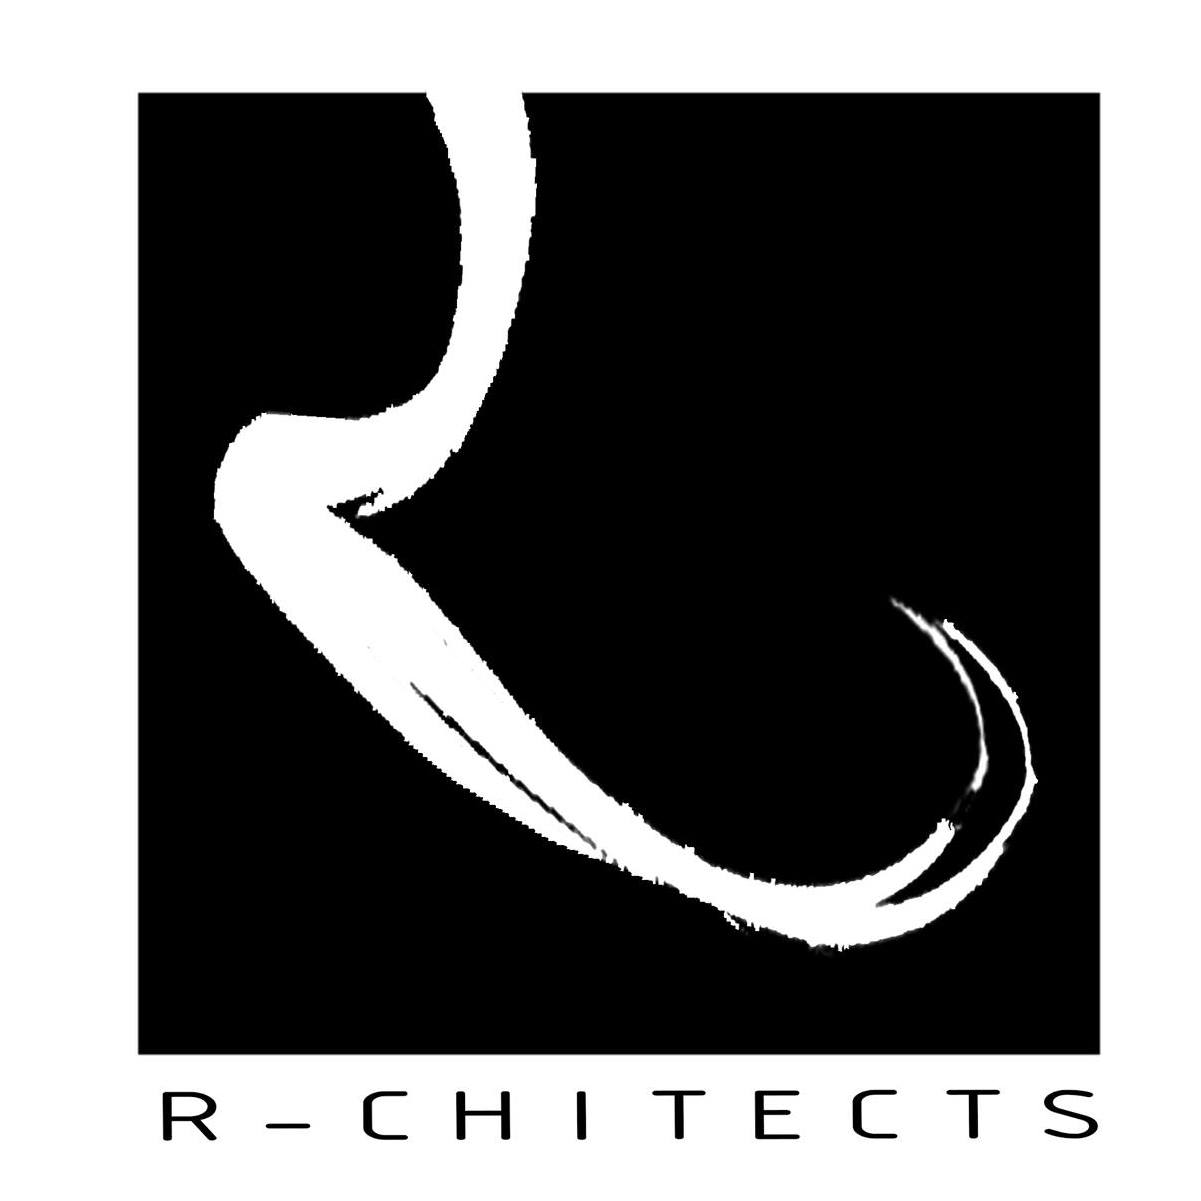 R-CHITECTS|Architect|Professional Services